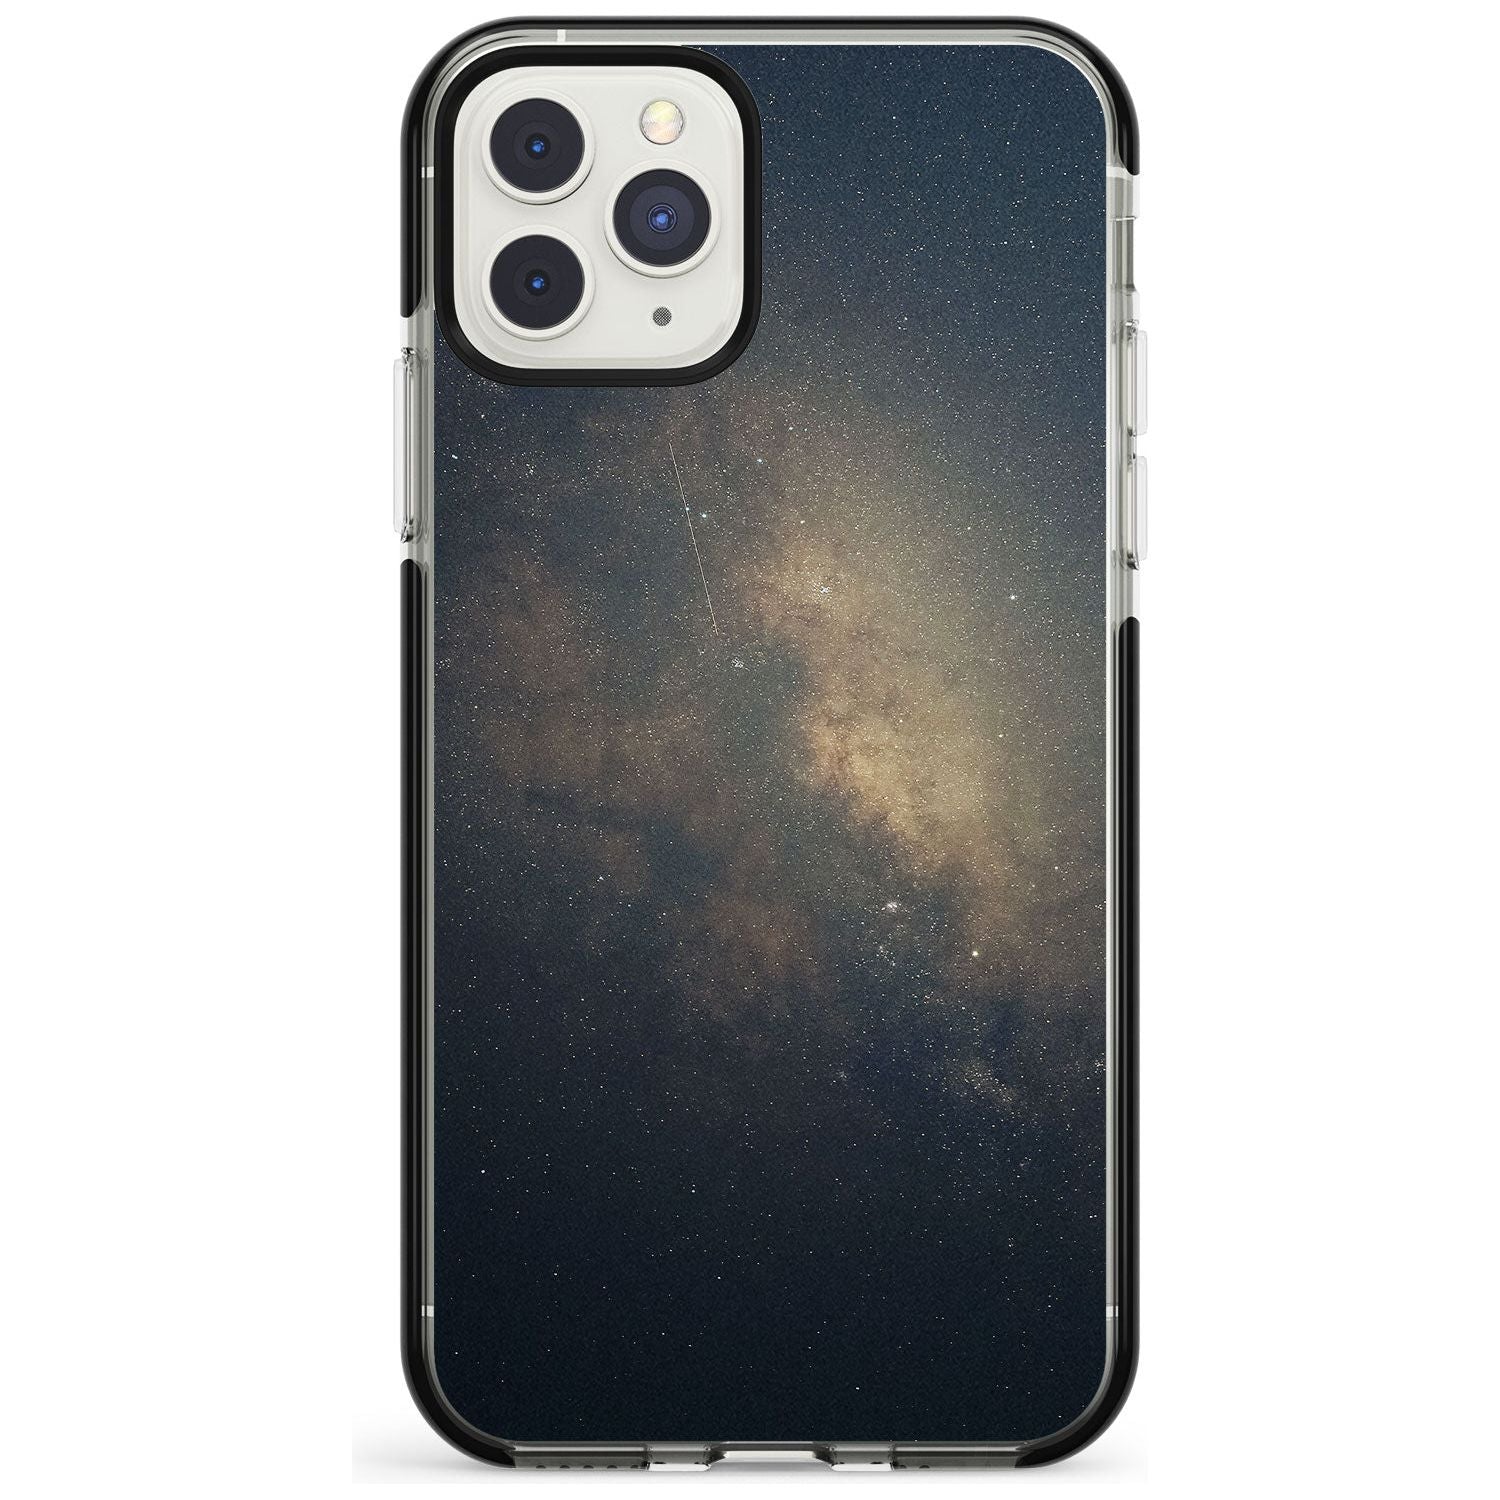 Night Sky Photograph Black Impact Phone Case for iPhone 11 Pro Max